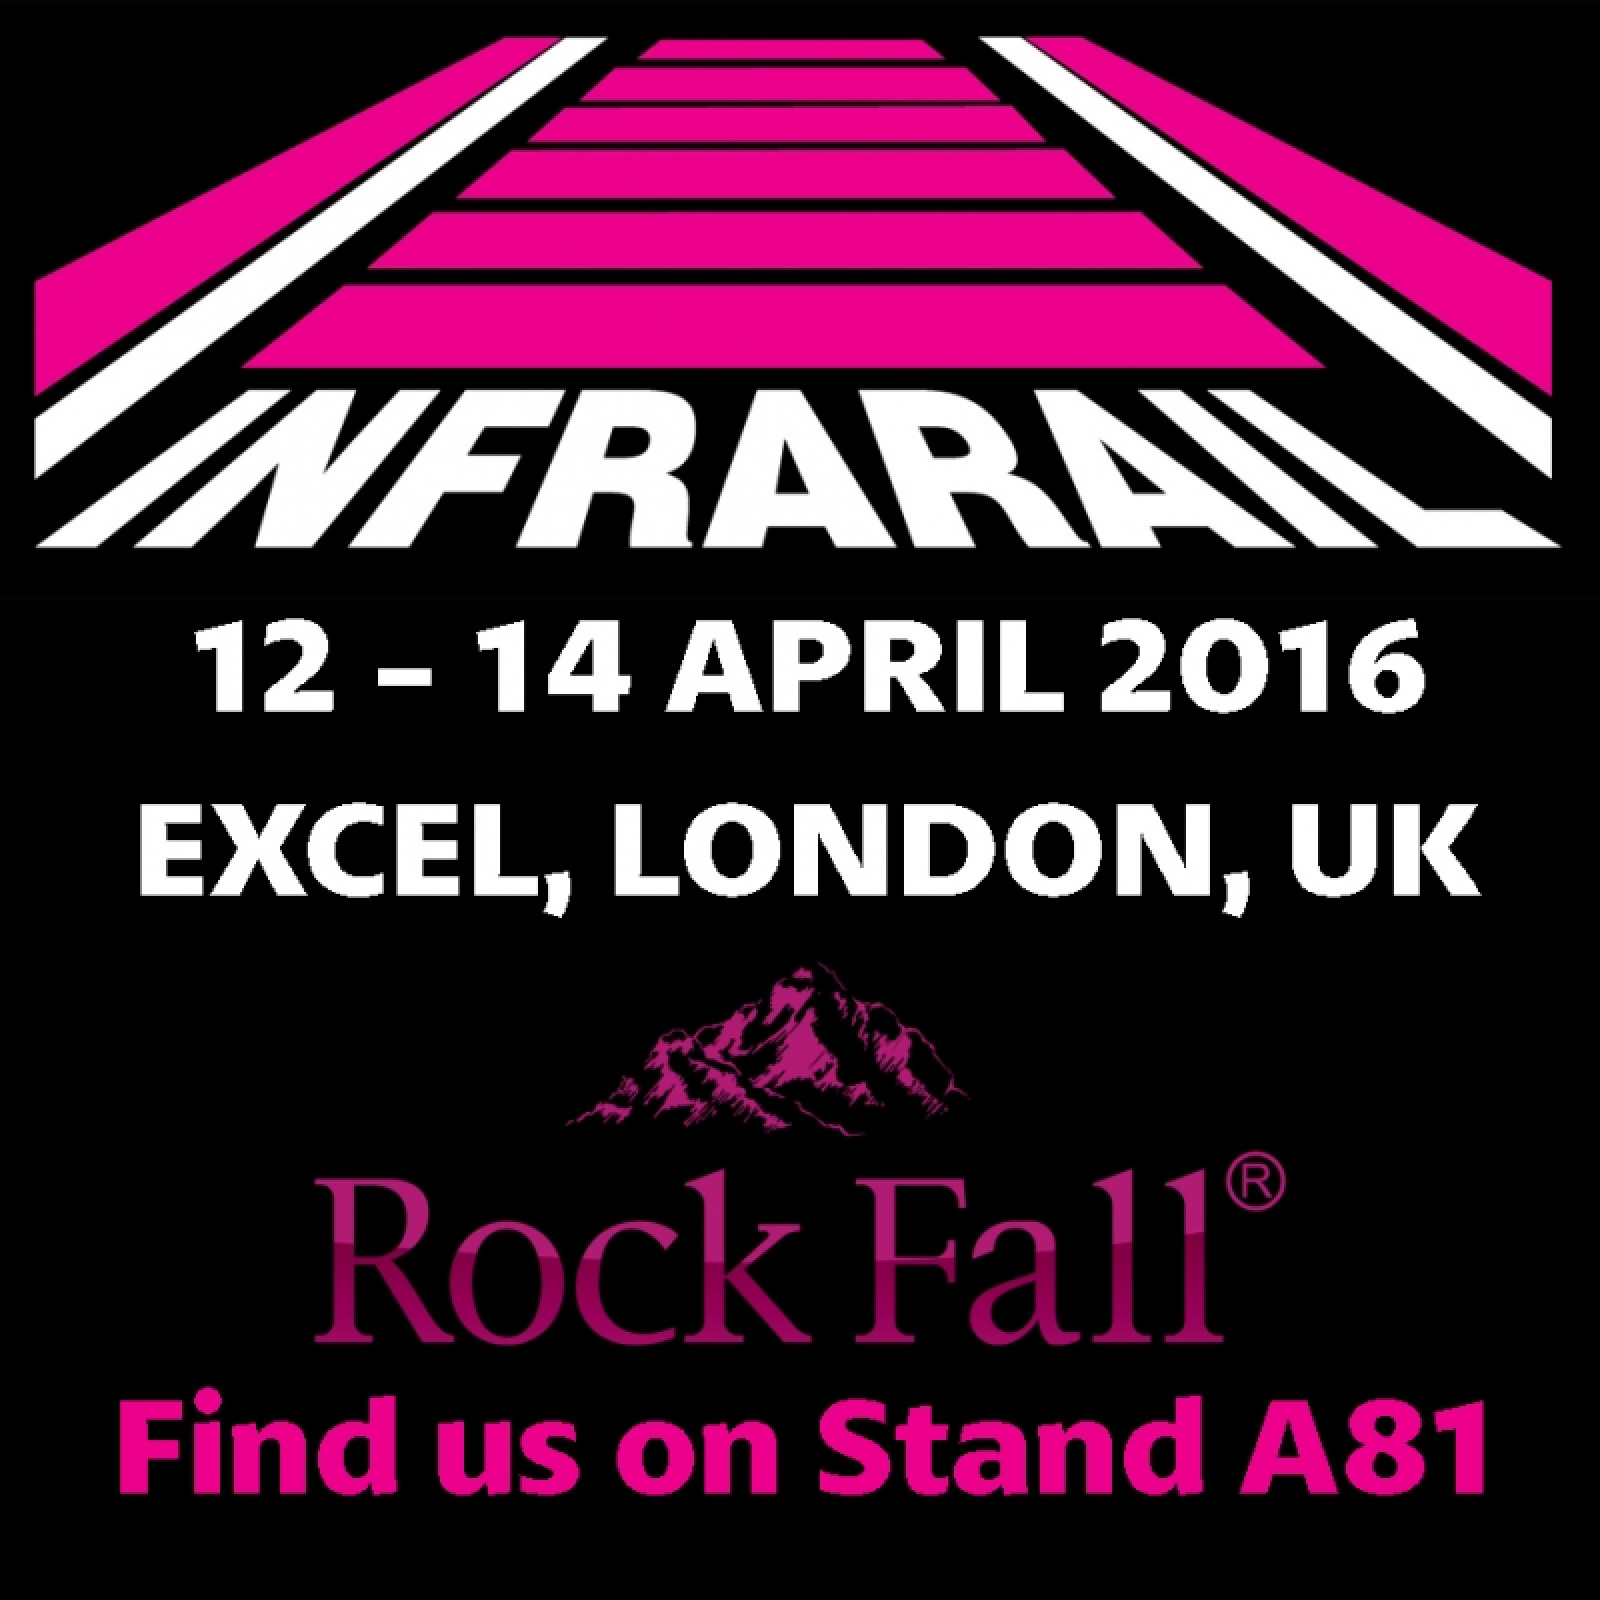 Are you going to Infrarail 2016?